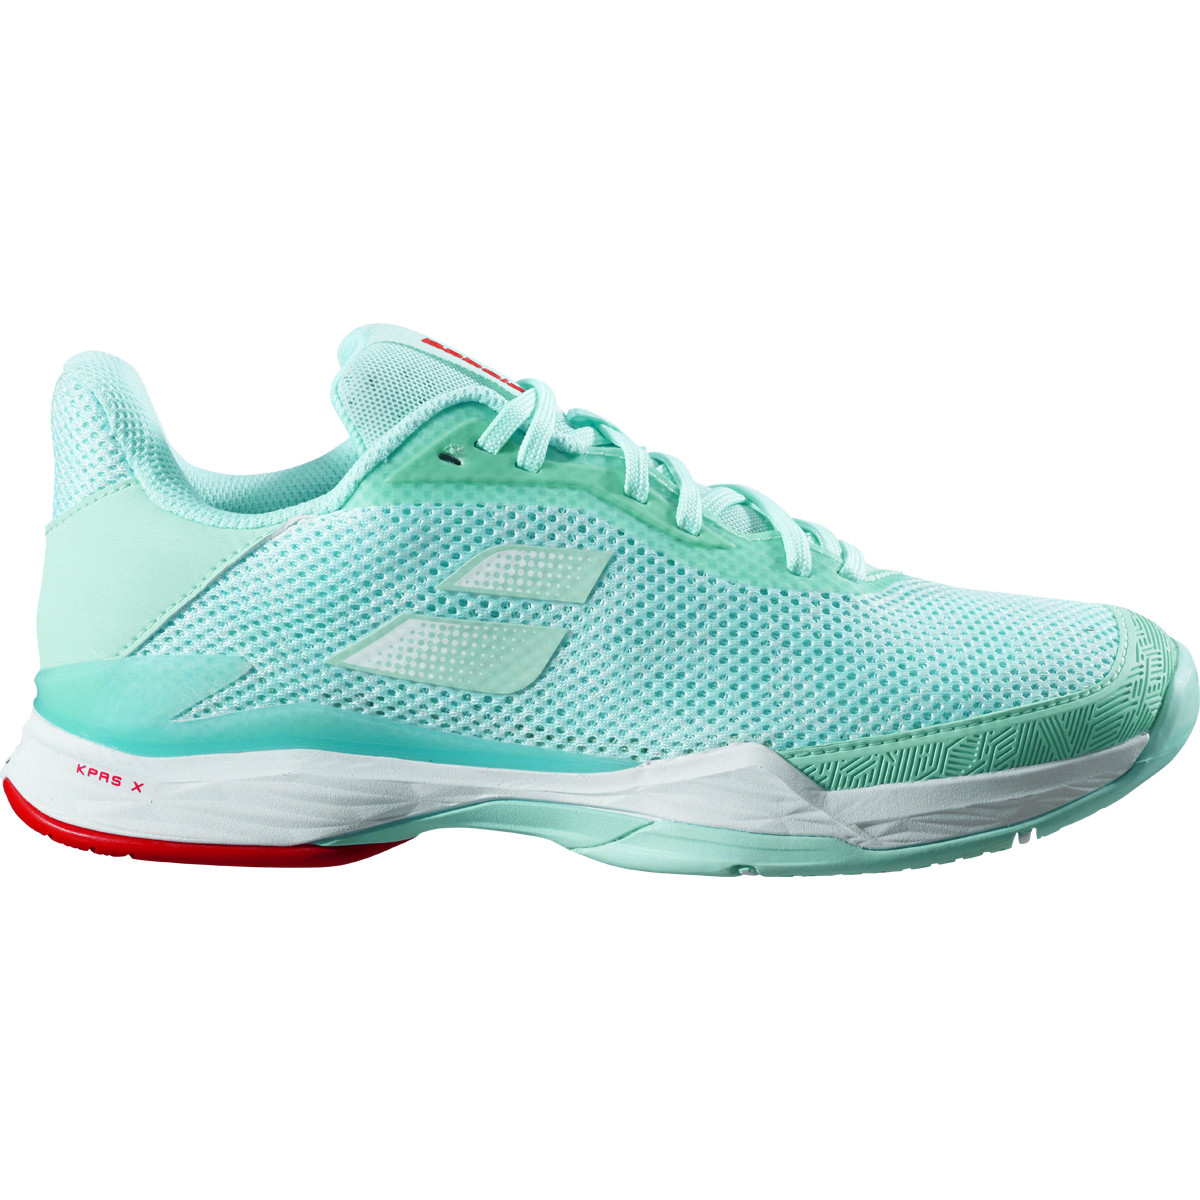 WOMEN'S BABOLAT JET TERE ALL COURT SHOES